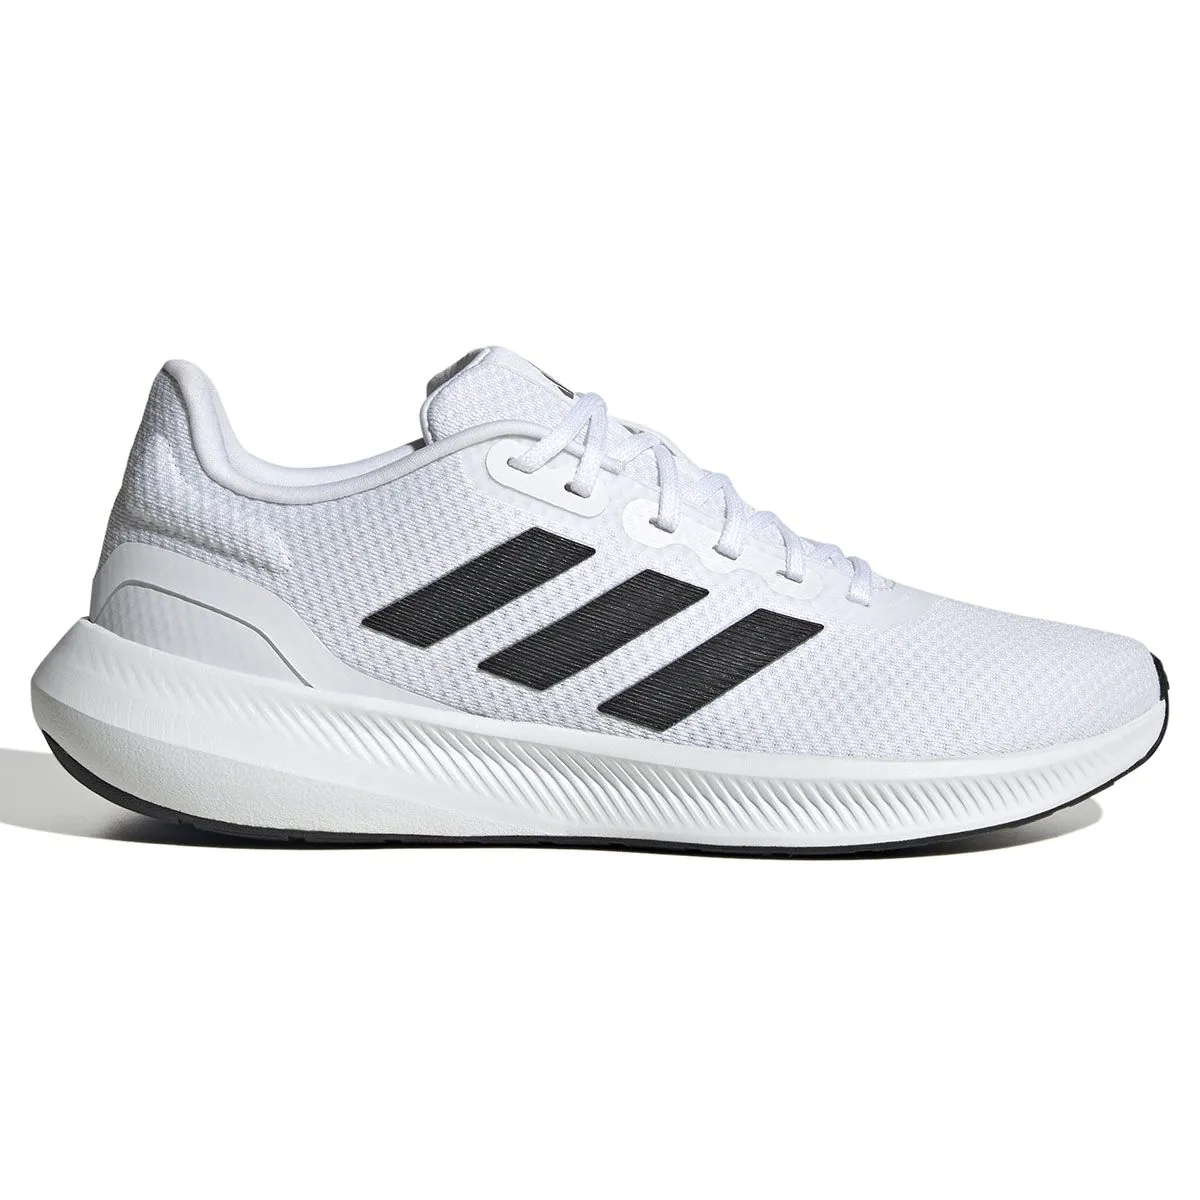 adidas lv court 3.0 sneakers womens